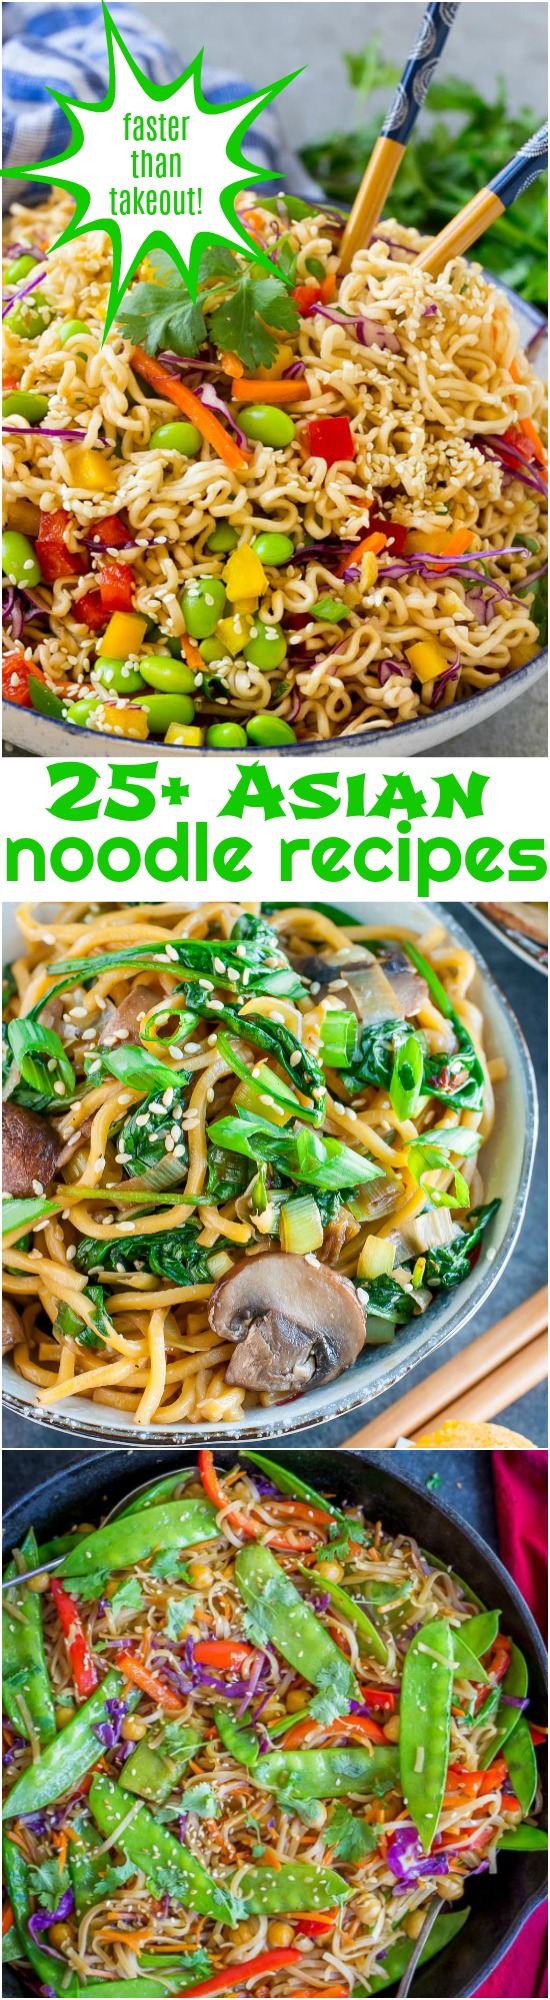 For all Asian loving, noodle loving foodies out there, I put together this incredible collection of 25+ Asian Noodle Recipes that are Easier than Takeout! 